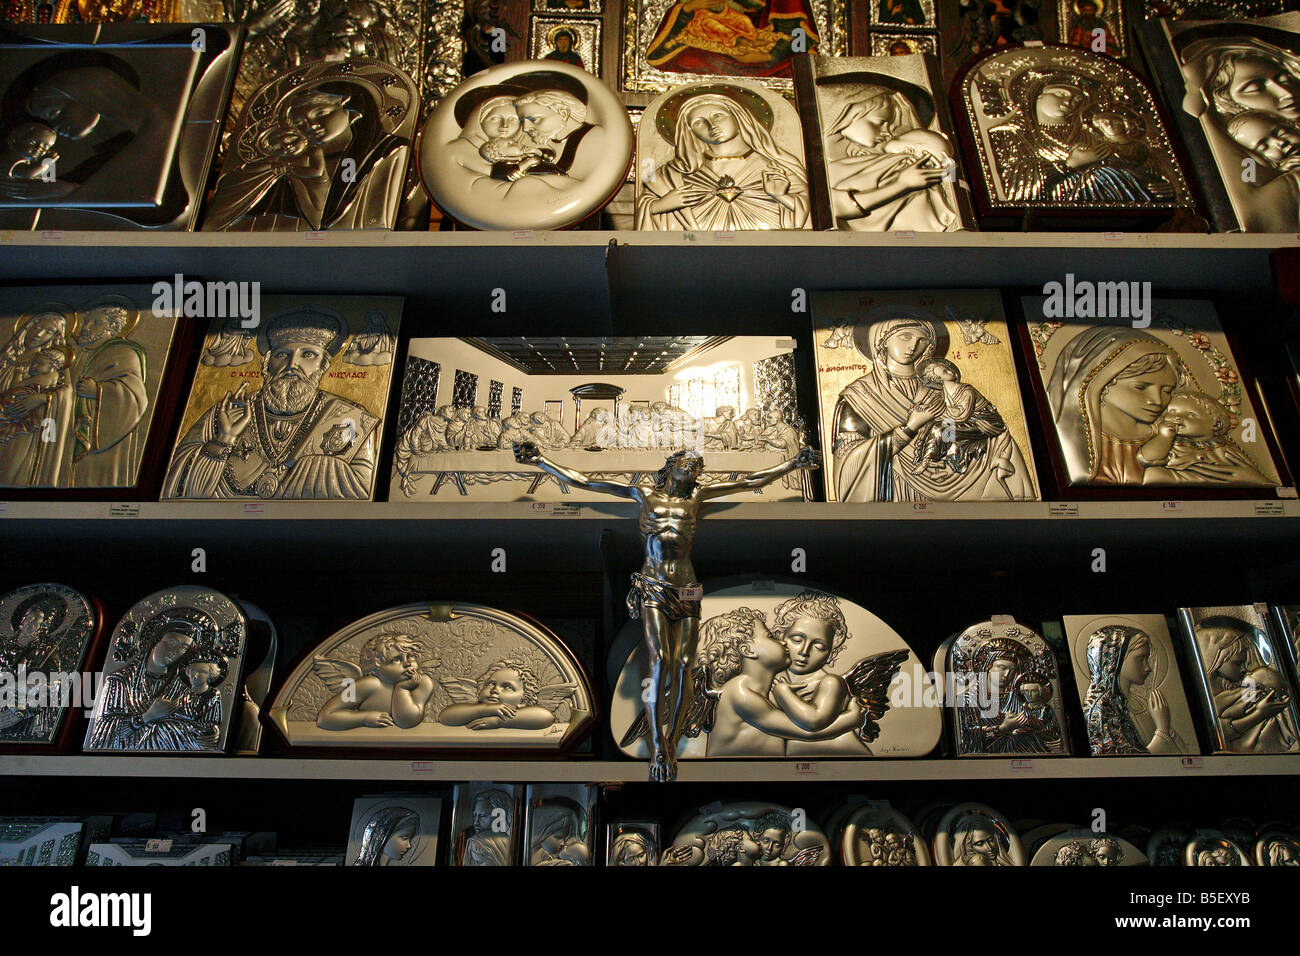 Images of Virgin Mary and Jesus Christ for sale, Ephesus, Turkey Stock Photo